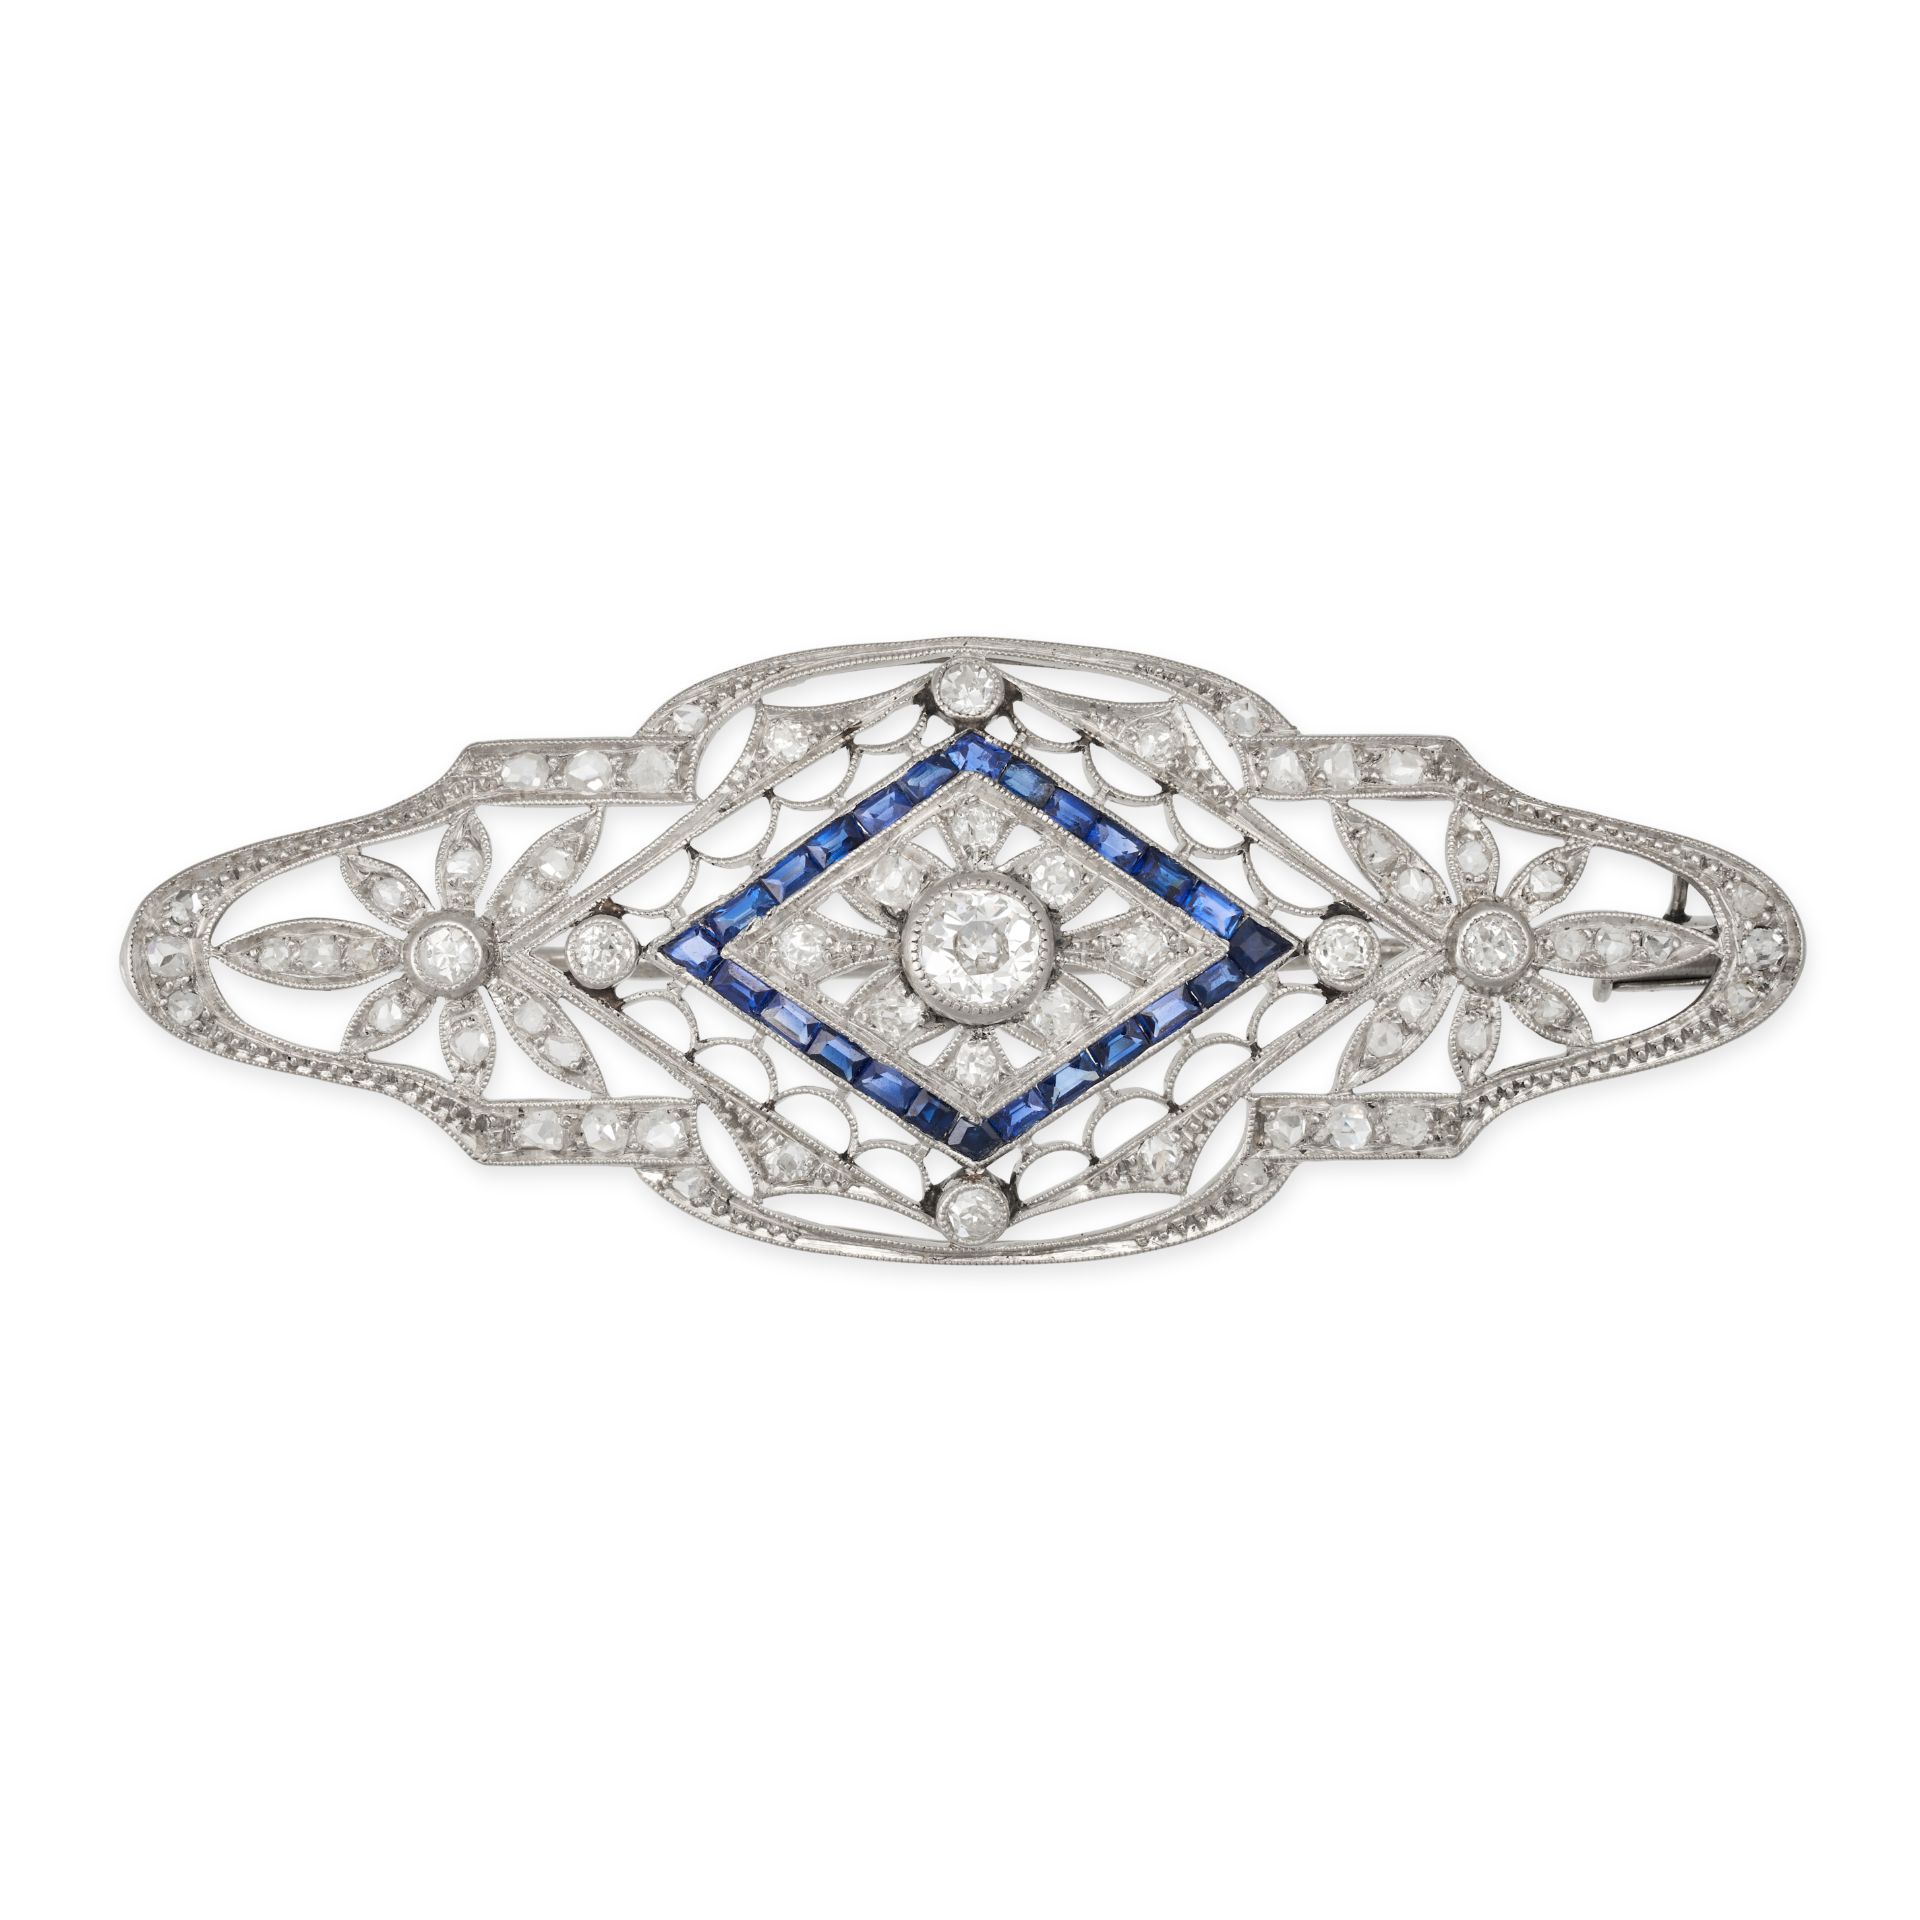 AN ANTIQUE FRENCH SAPPHIRE AND DIAMOND BROOCH in platinum, the openwork brooch set throughout wit...